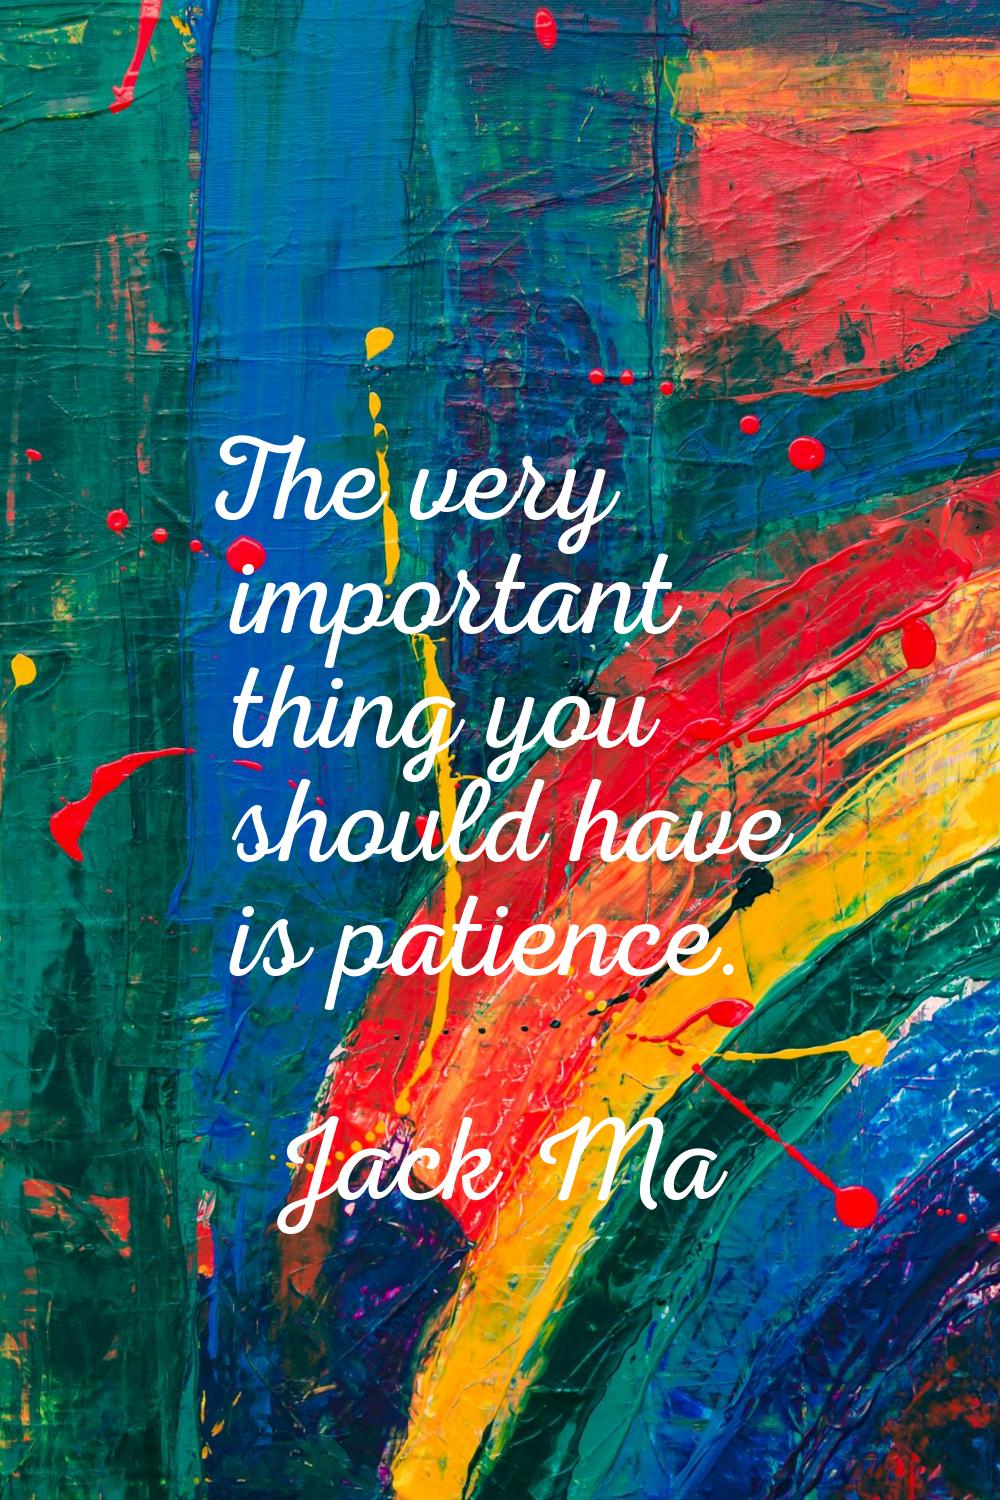 The very important thing you should have is patience.